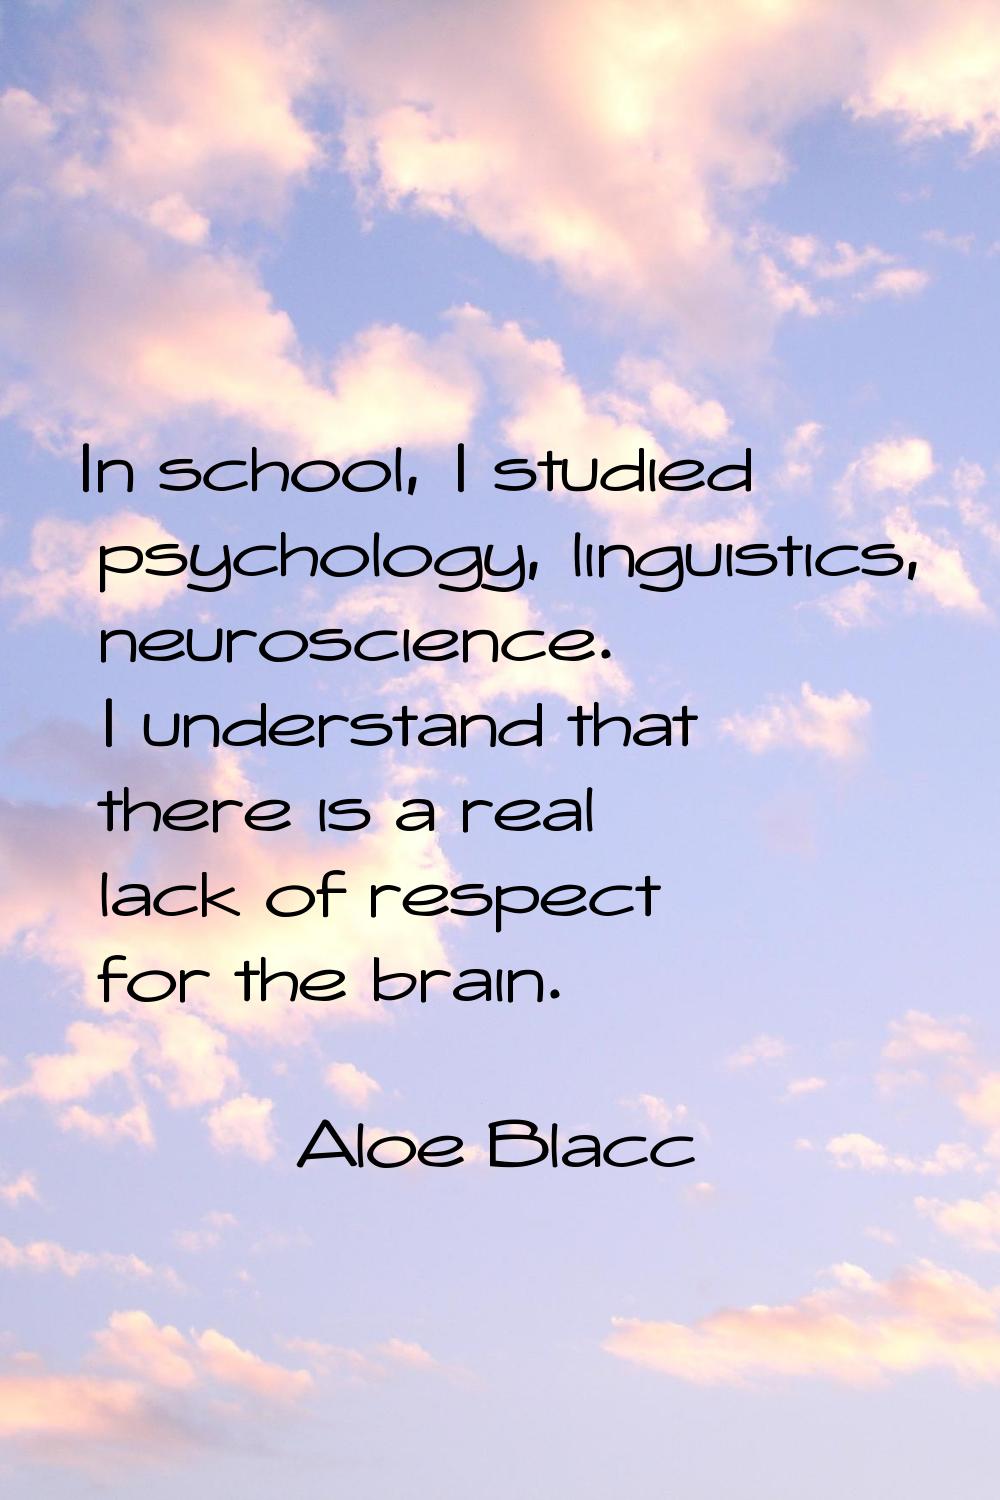 In school, I studied psychology, linguistics, neuroscience. I understand that there is a real lack 